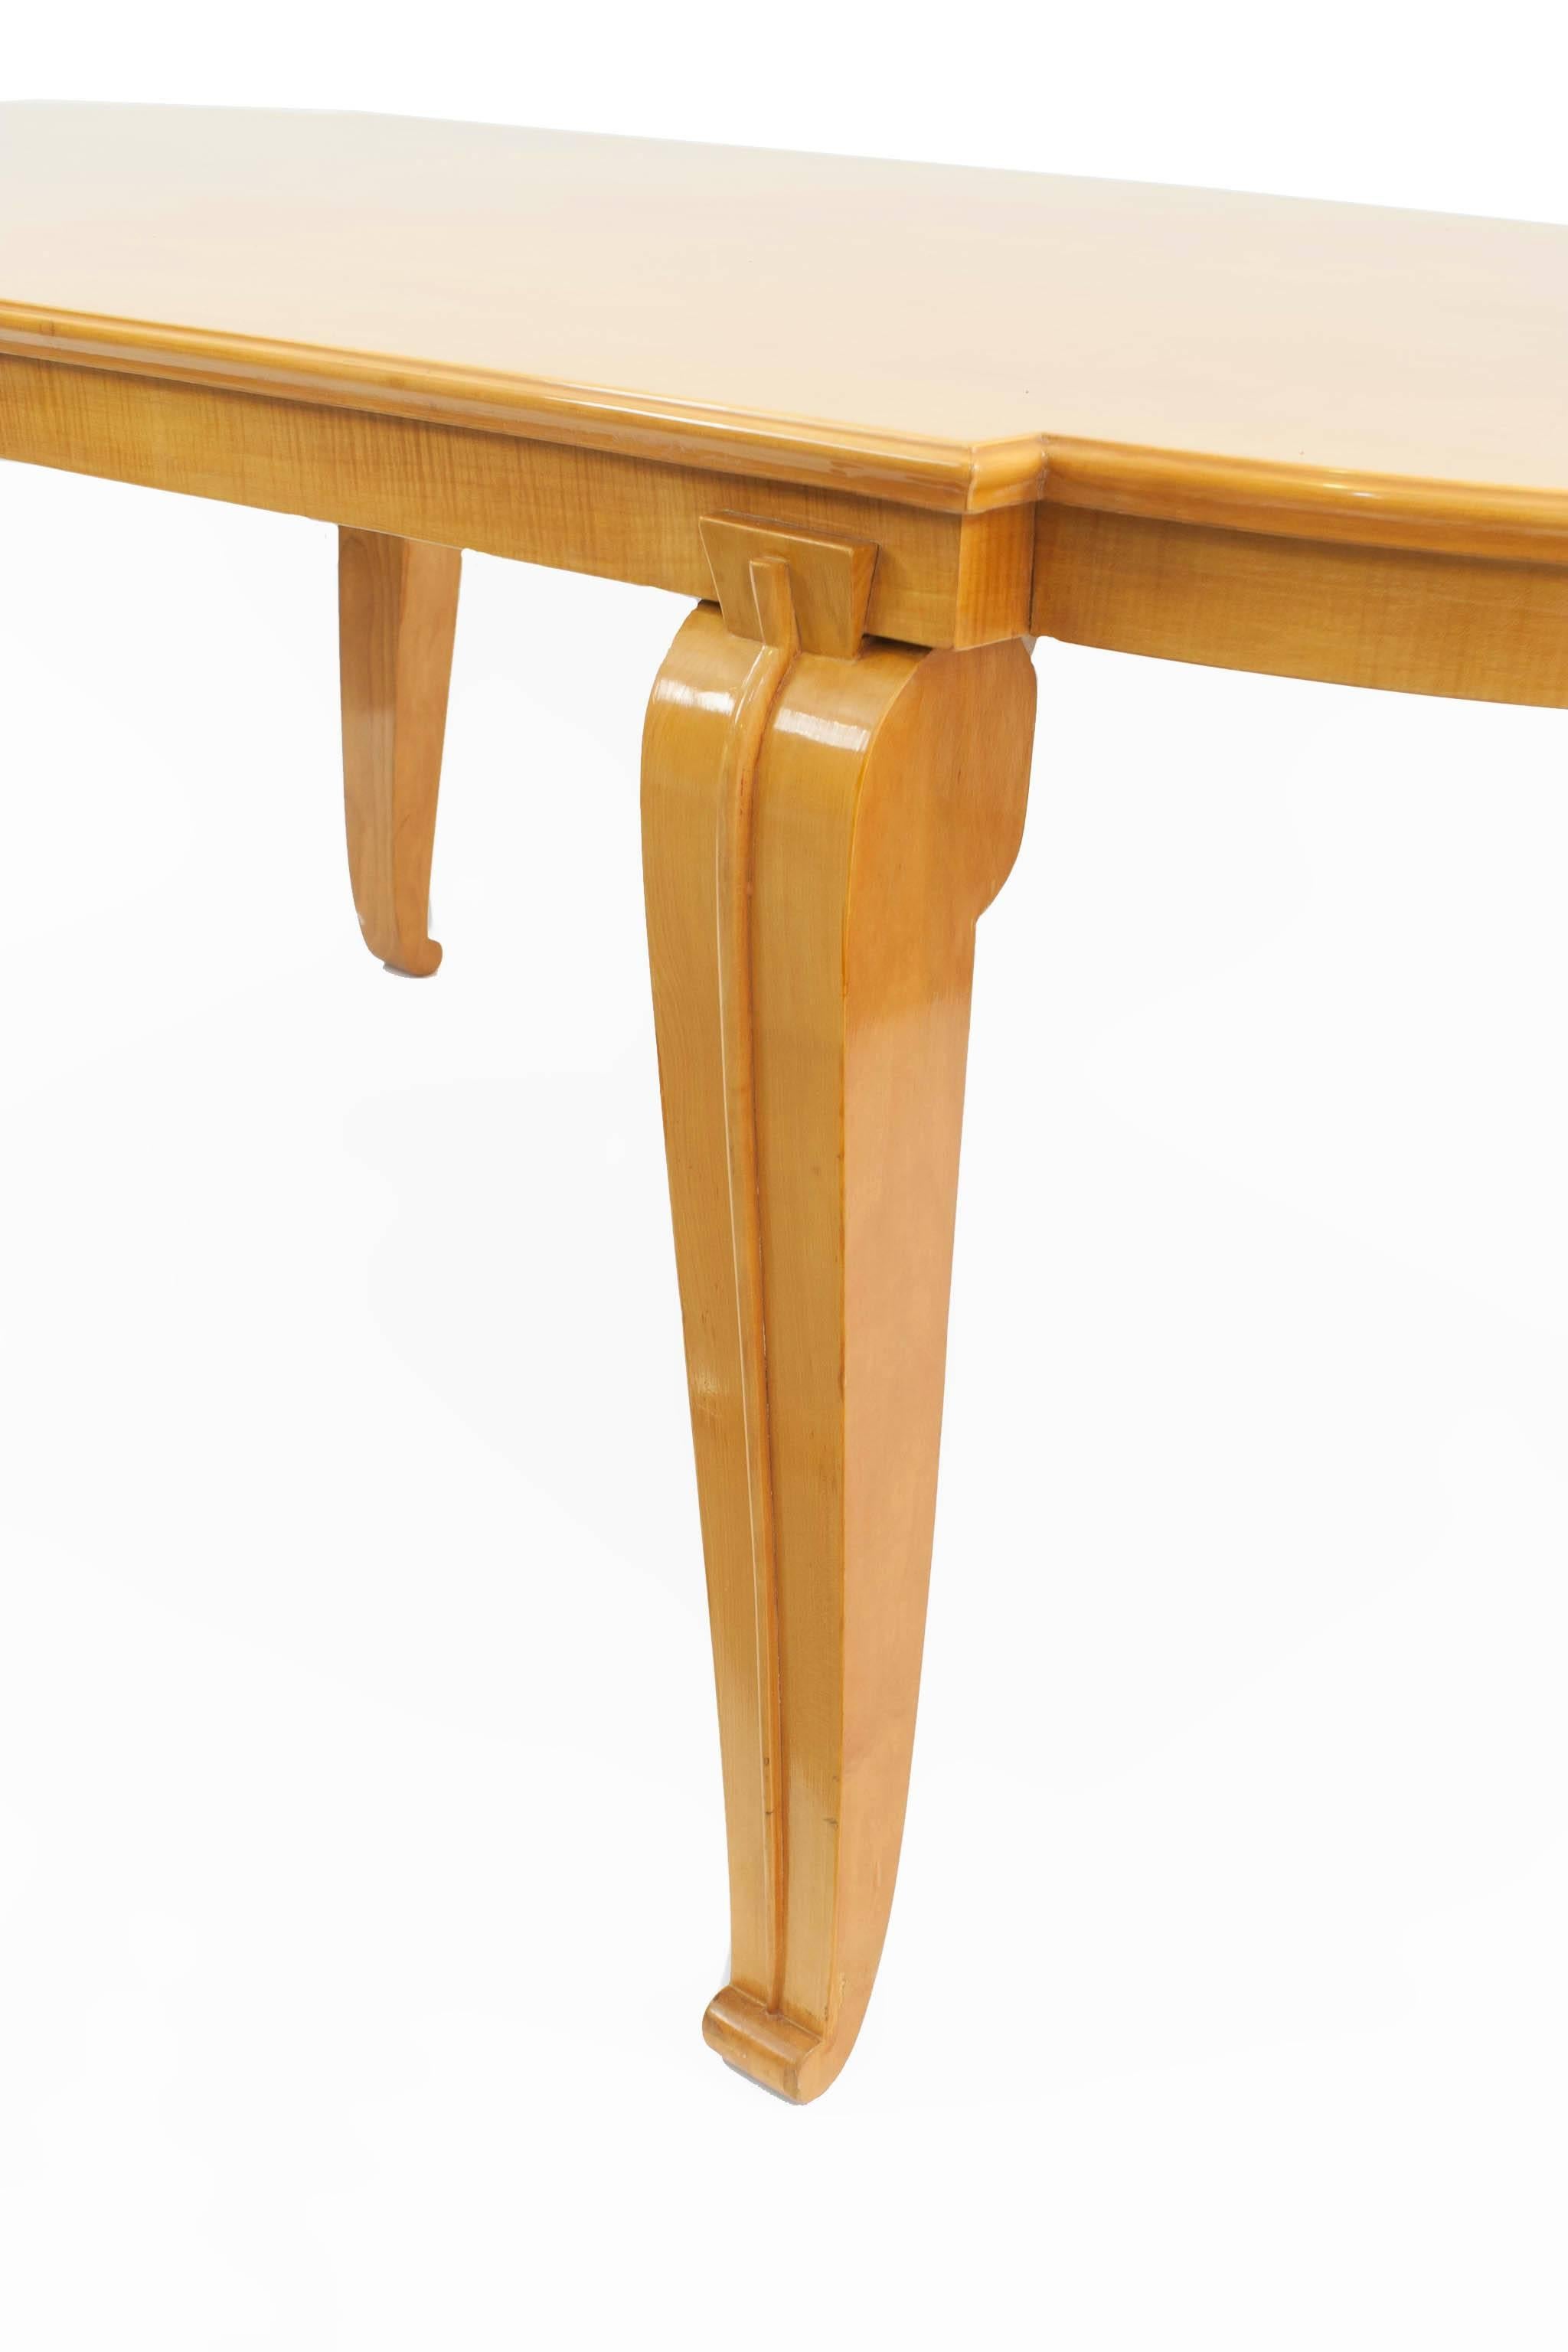 Andre Arbus French Mid-Century Sycamore Dining Table In Good Condition For Sale In New York, NY